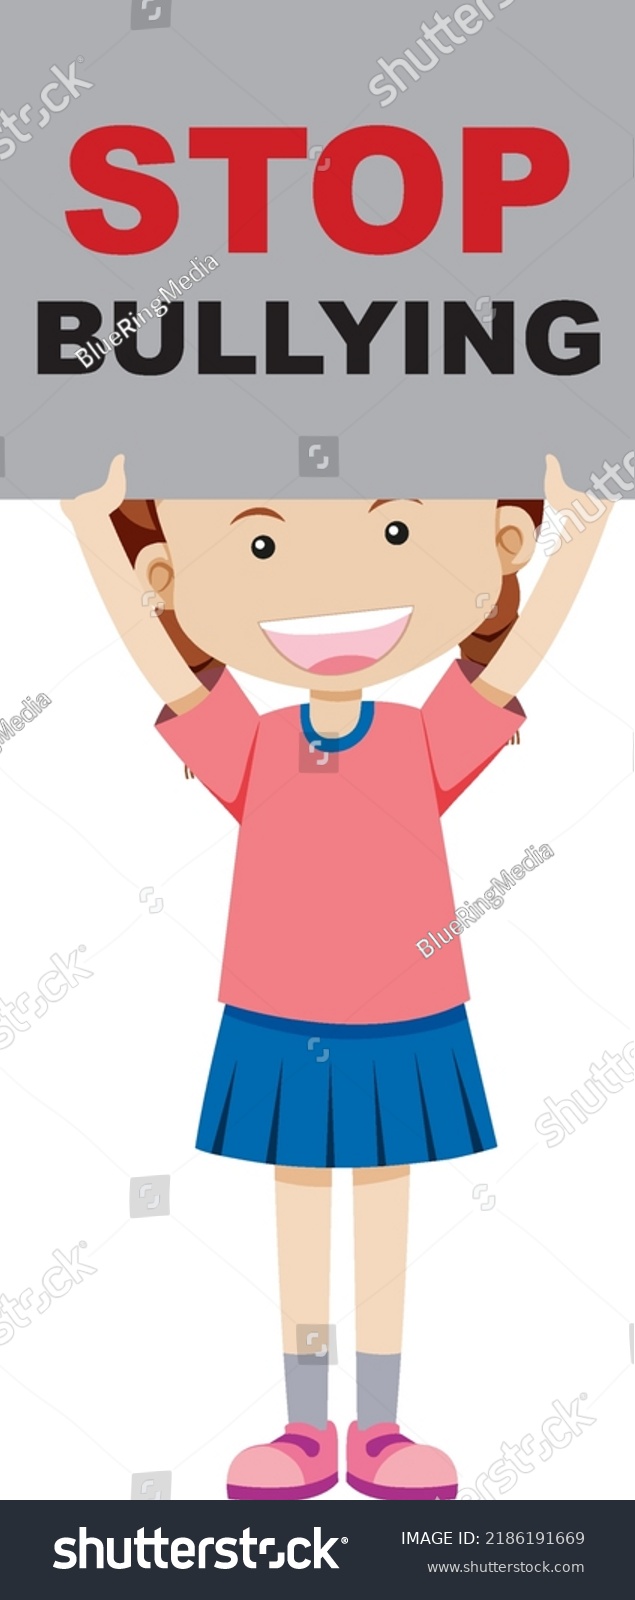 Stop Bullying Concept Vector Illustration Stock Vector (Royalty Free ...